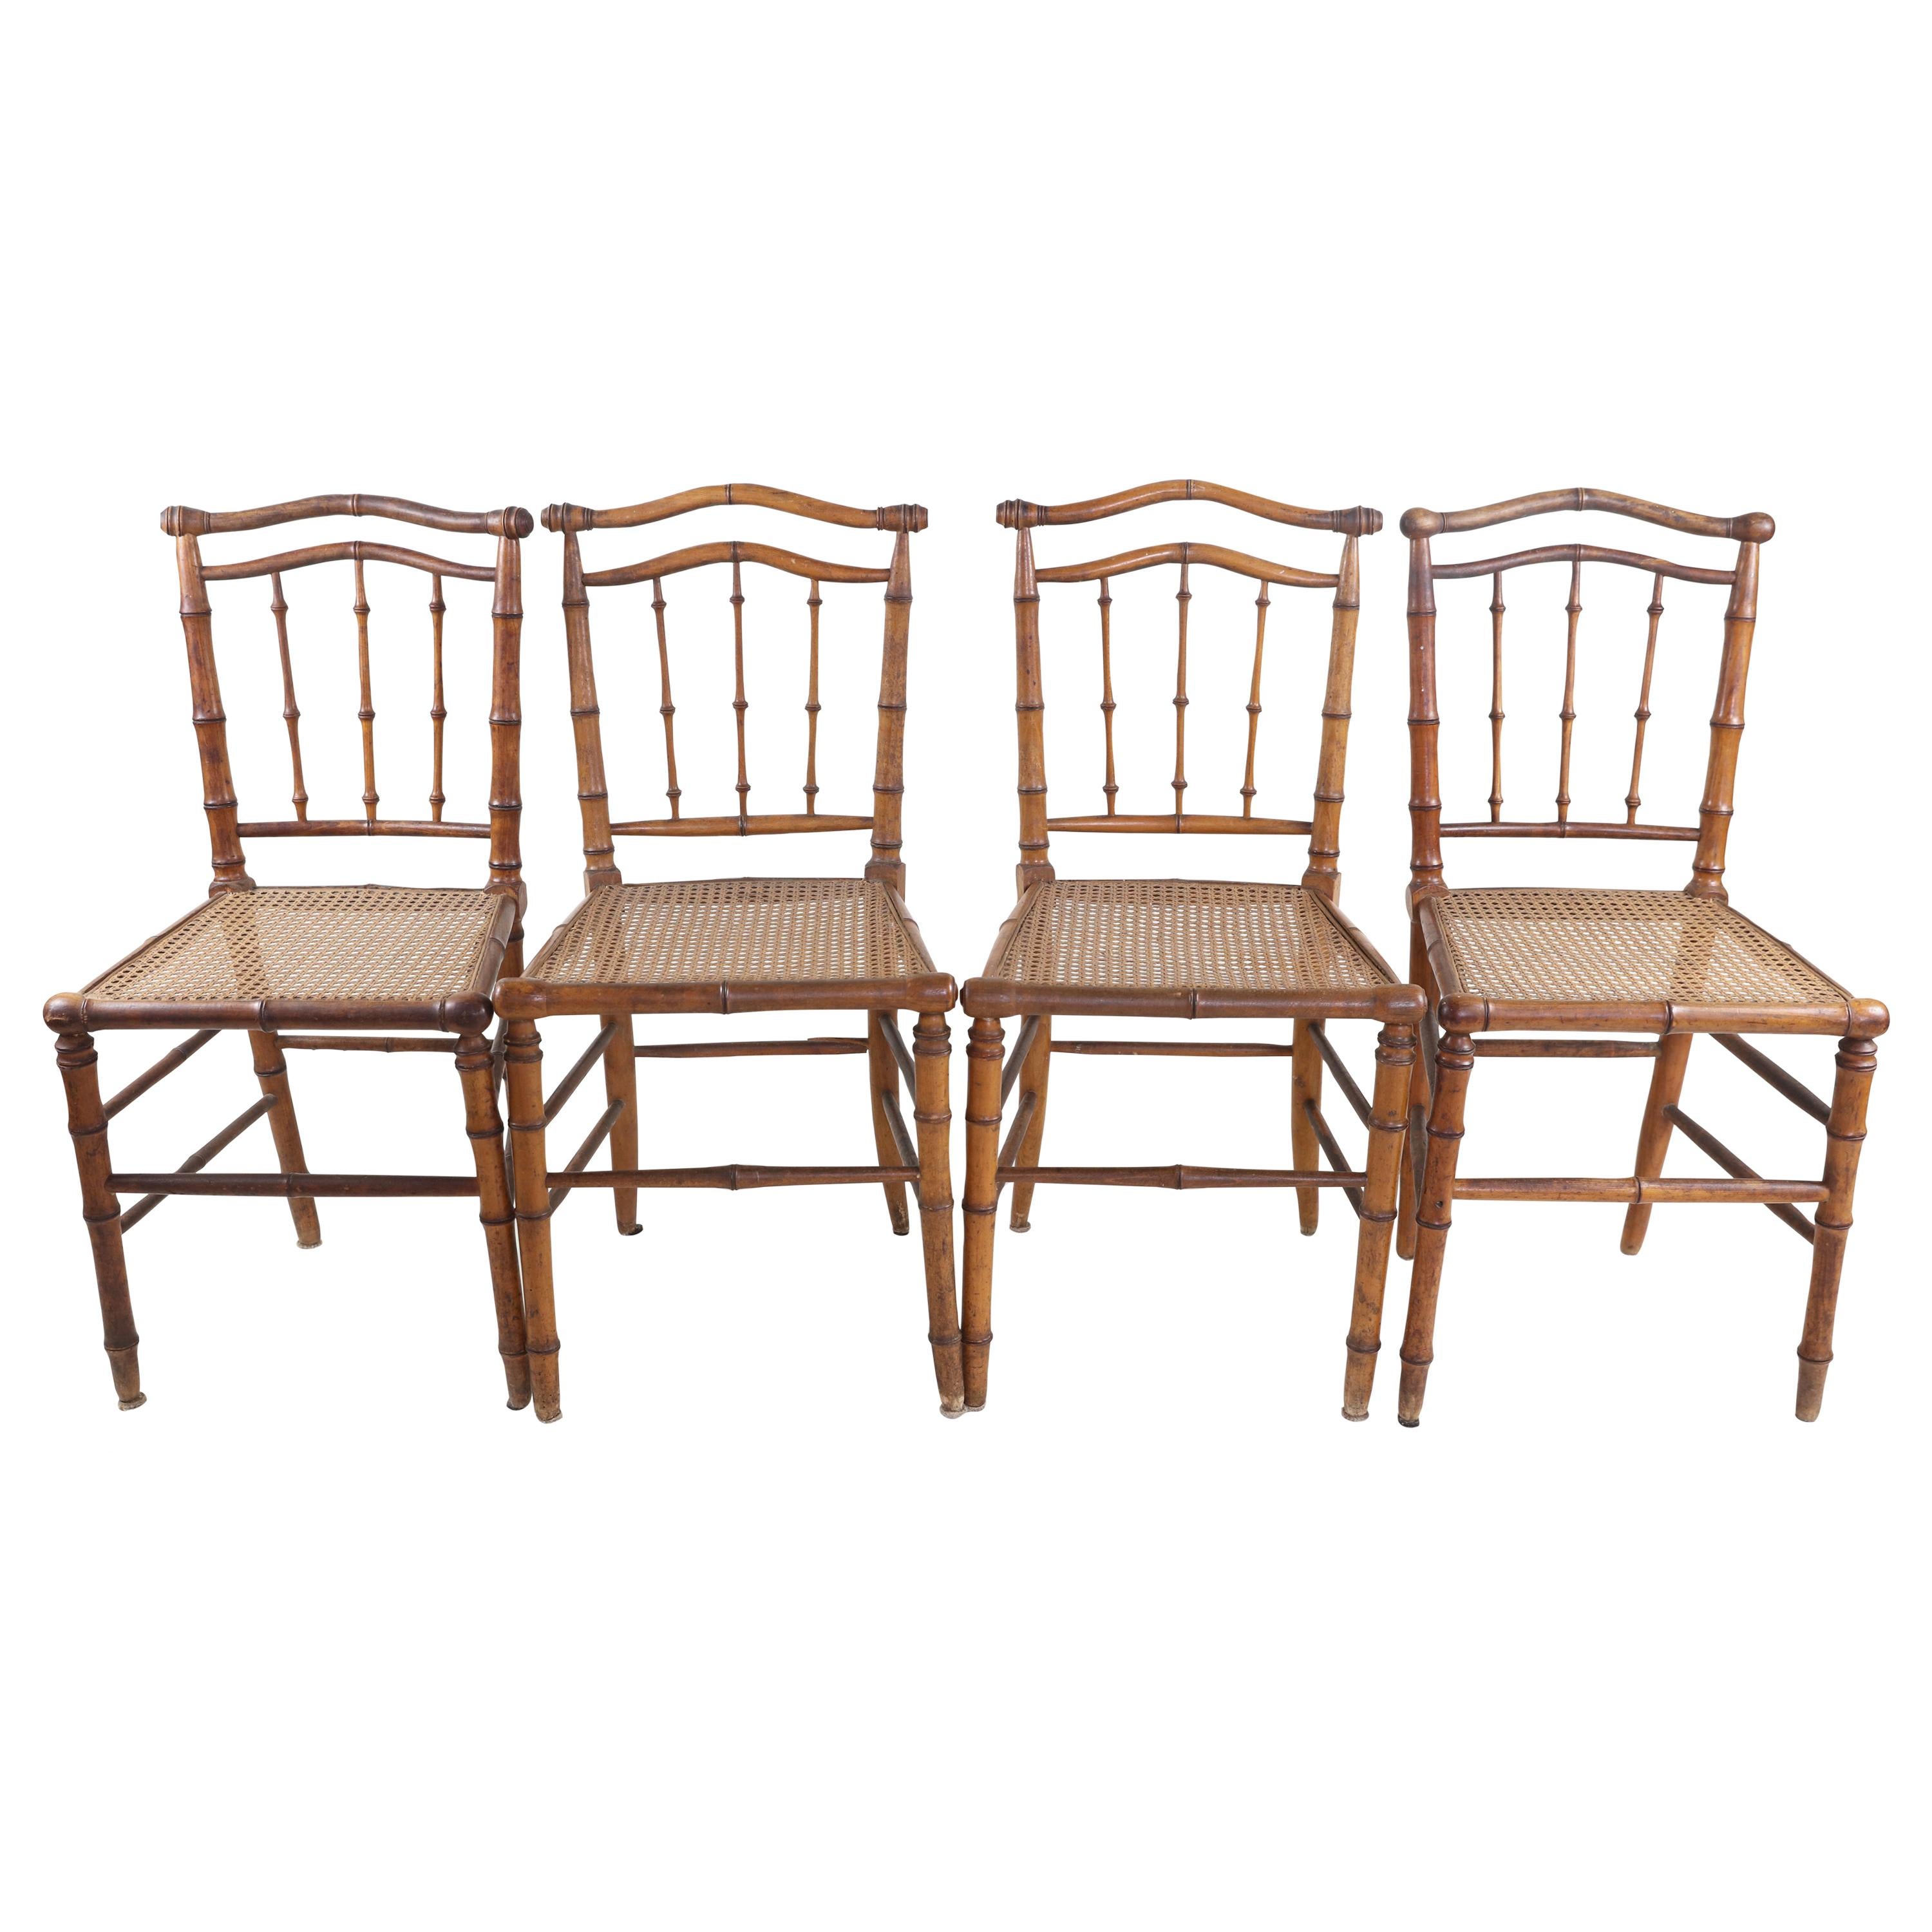 4 Antique Faux Bamboo Chairs